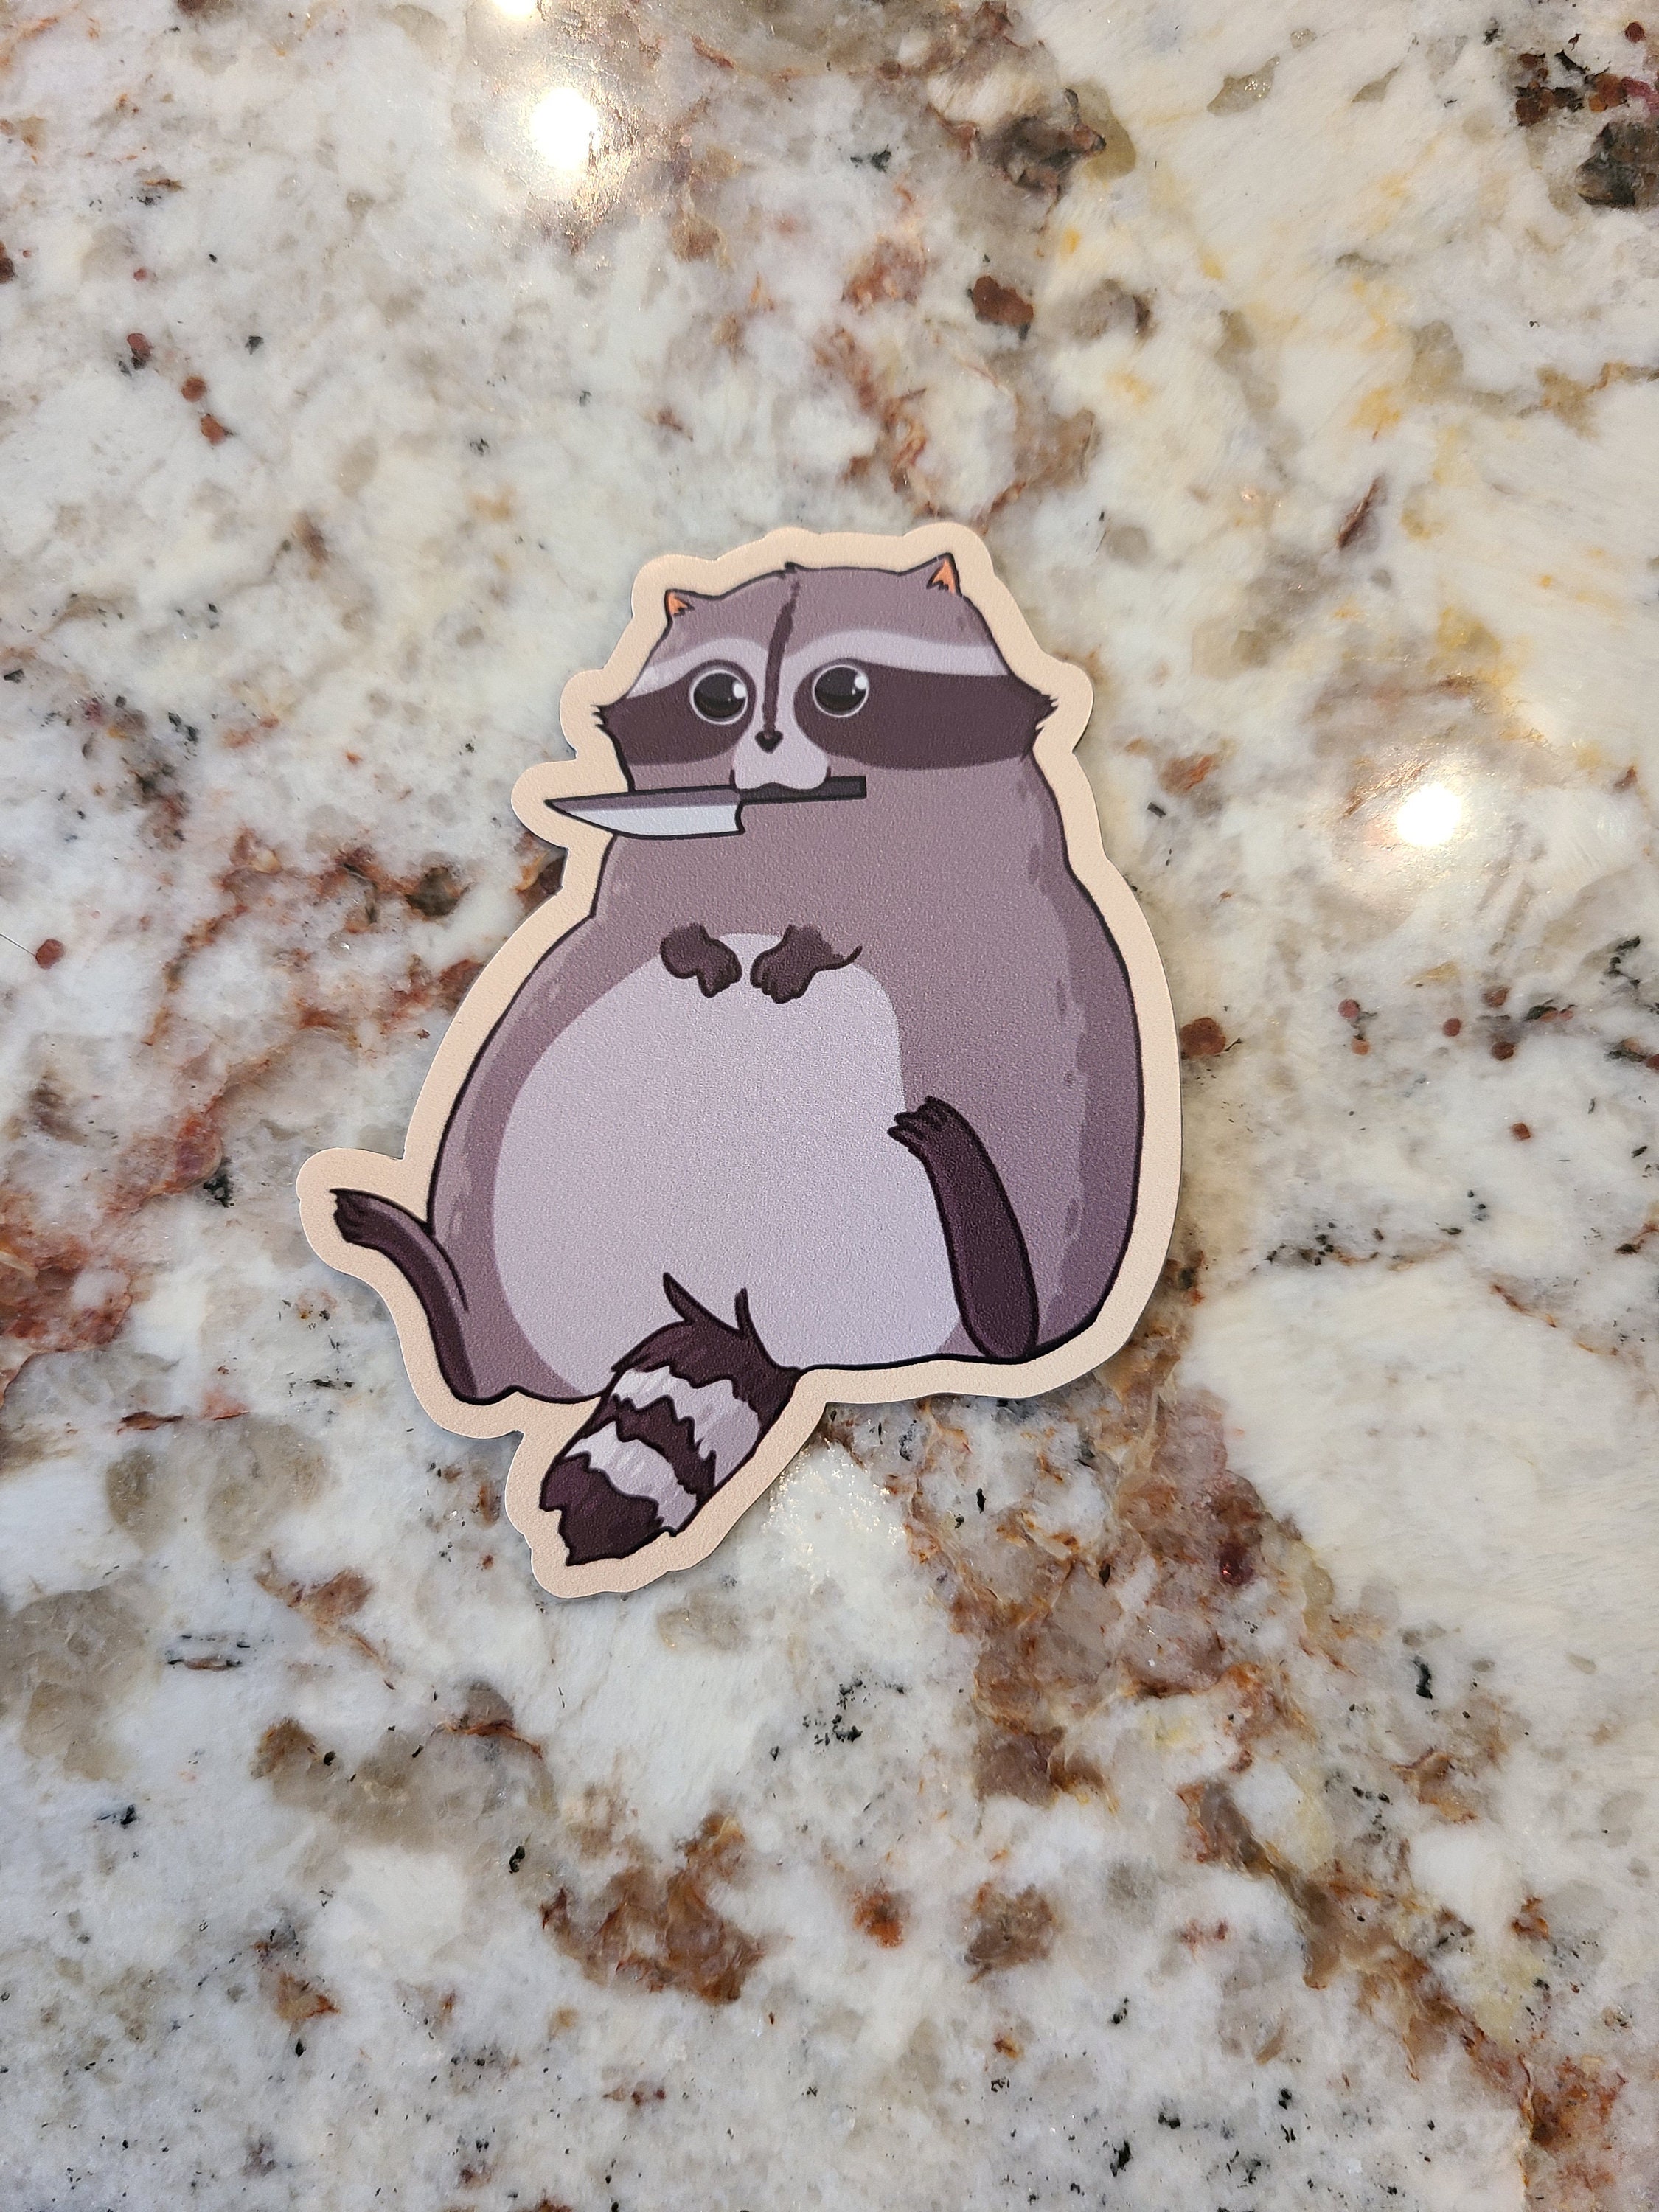 Funny clever sassy refridgerator magnet for women gift by Raccoon Society  USA – The Raccoon Society